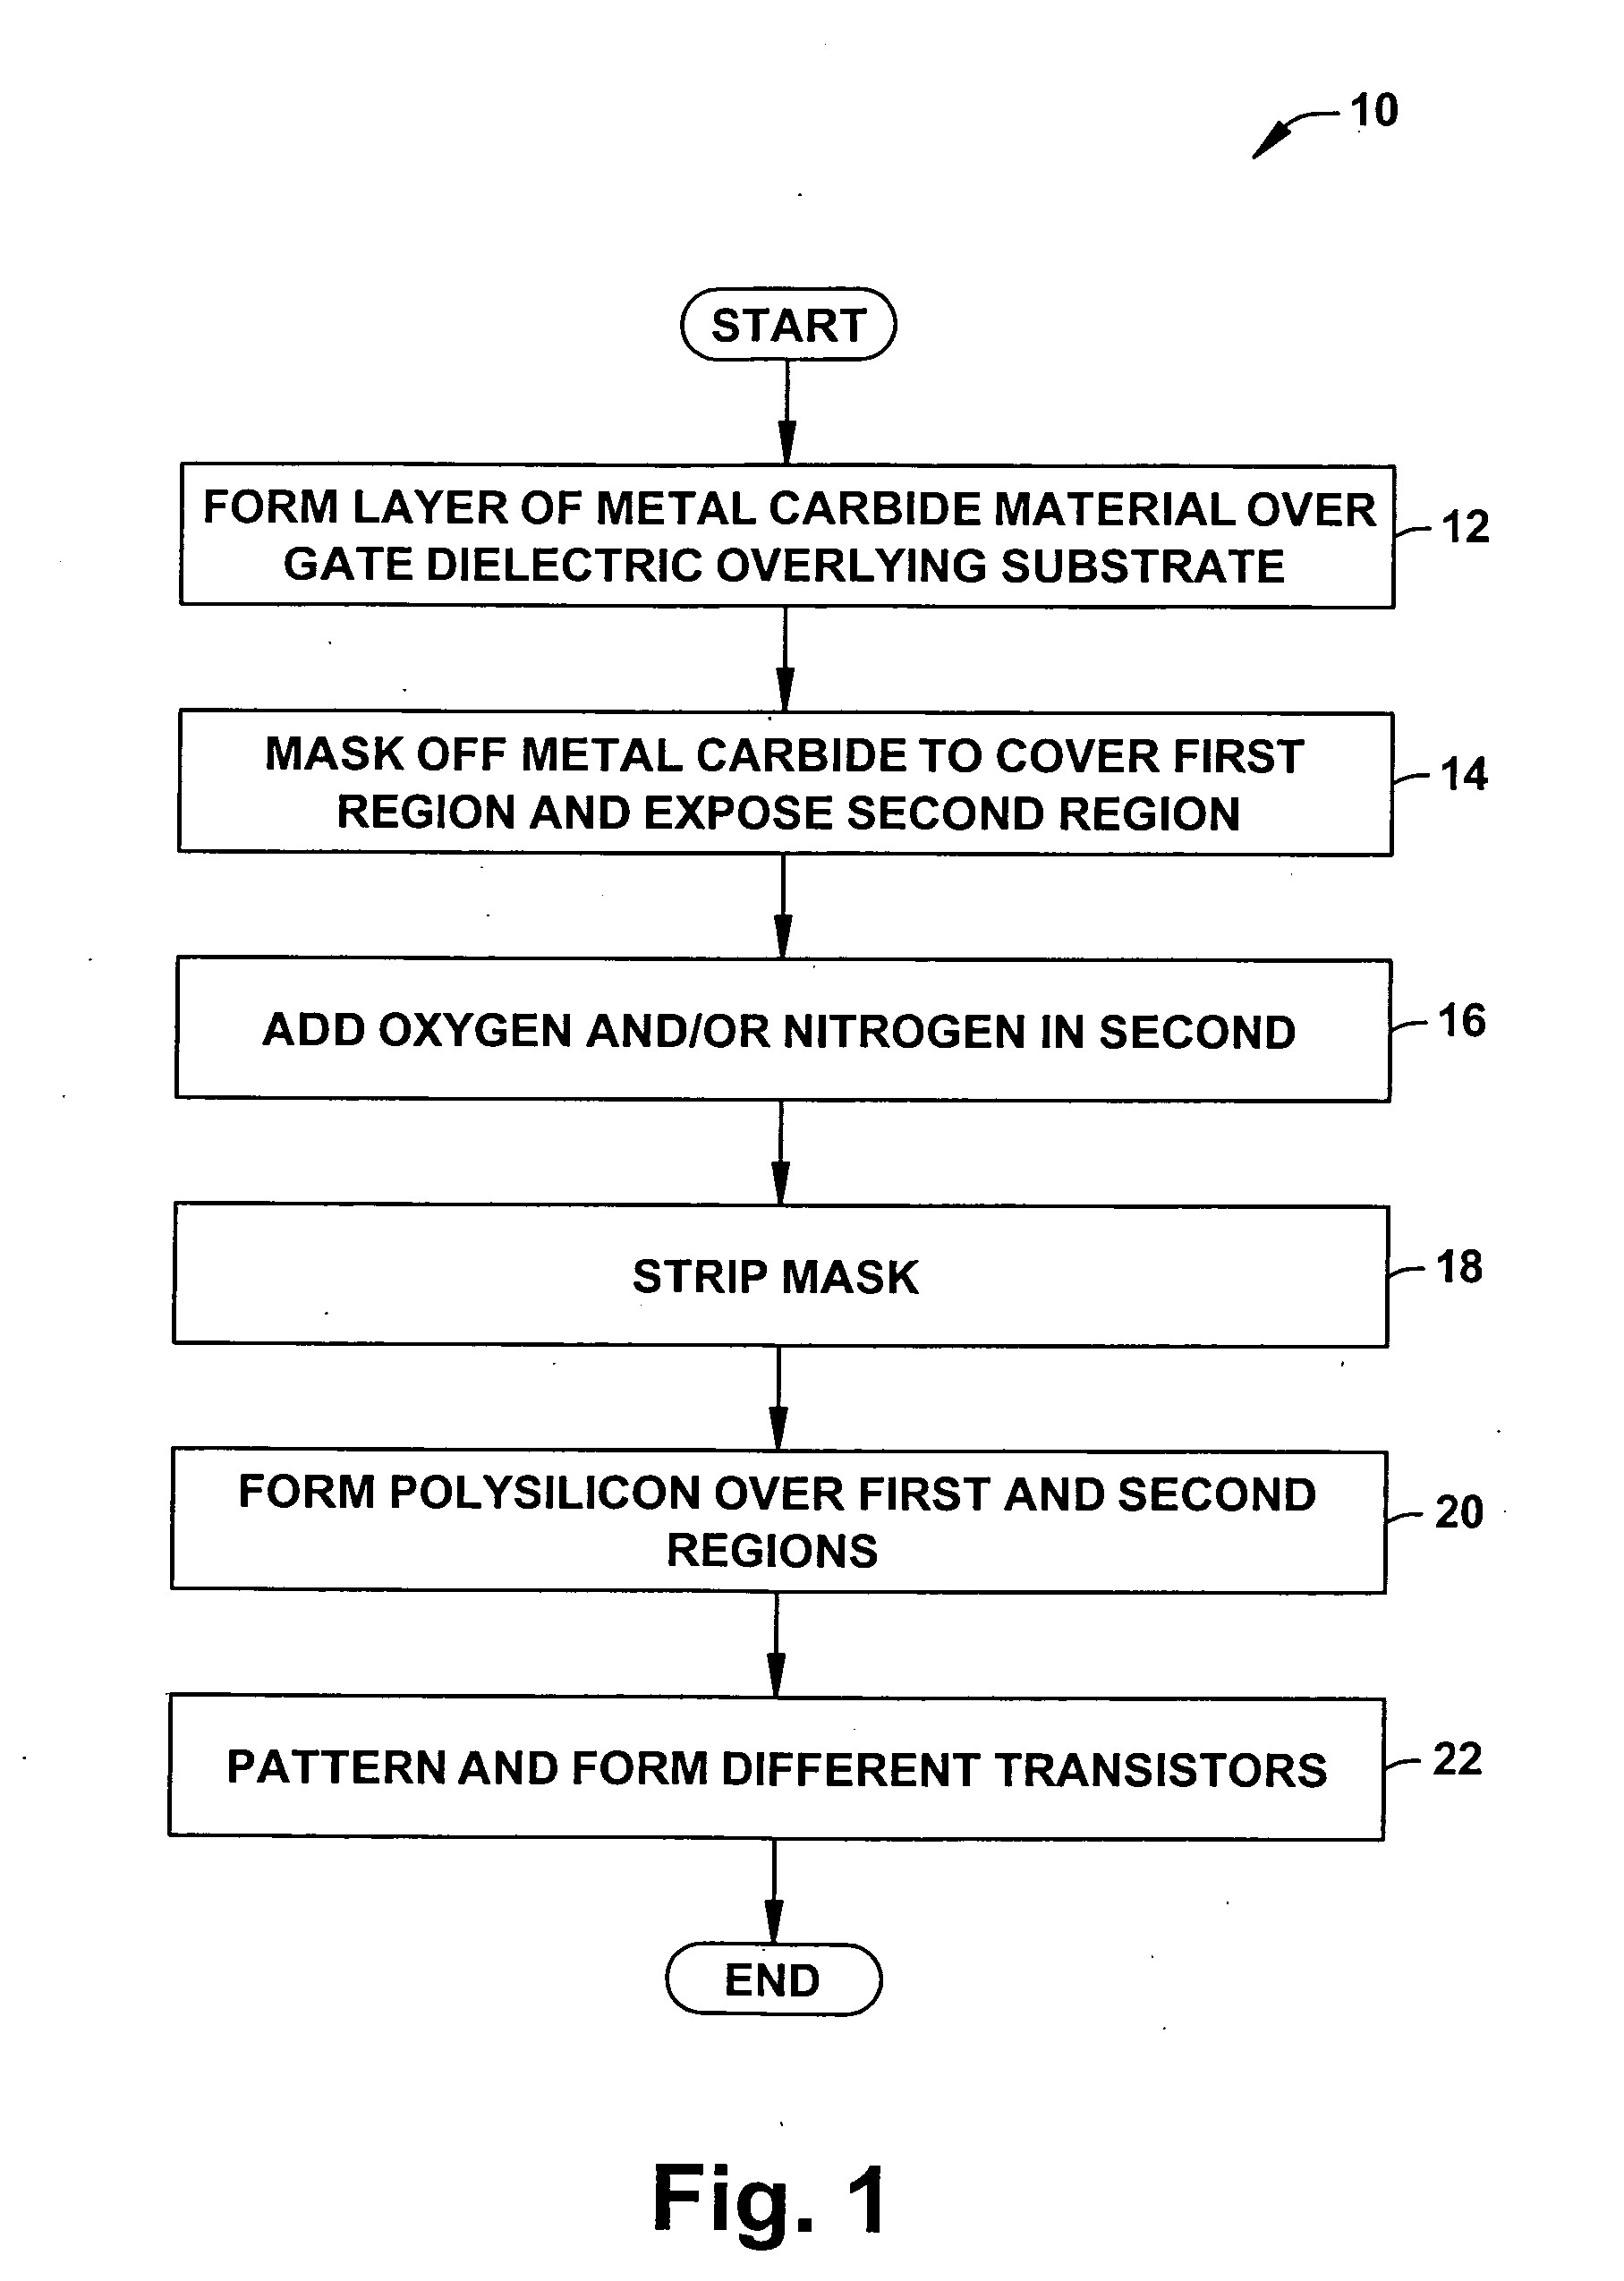 Dual work function CMOS devices utilizing carbide based electrodes